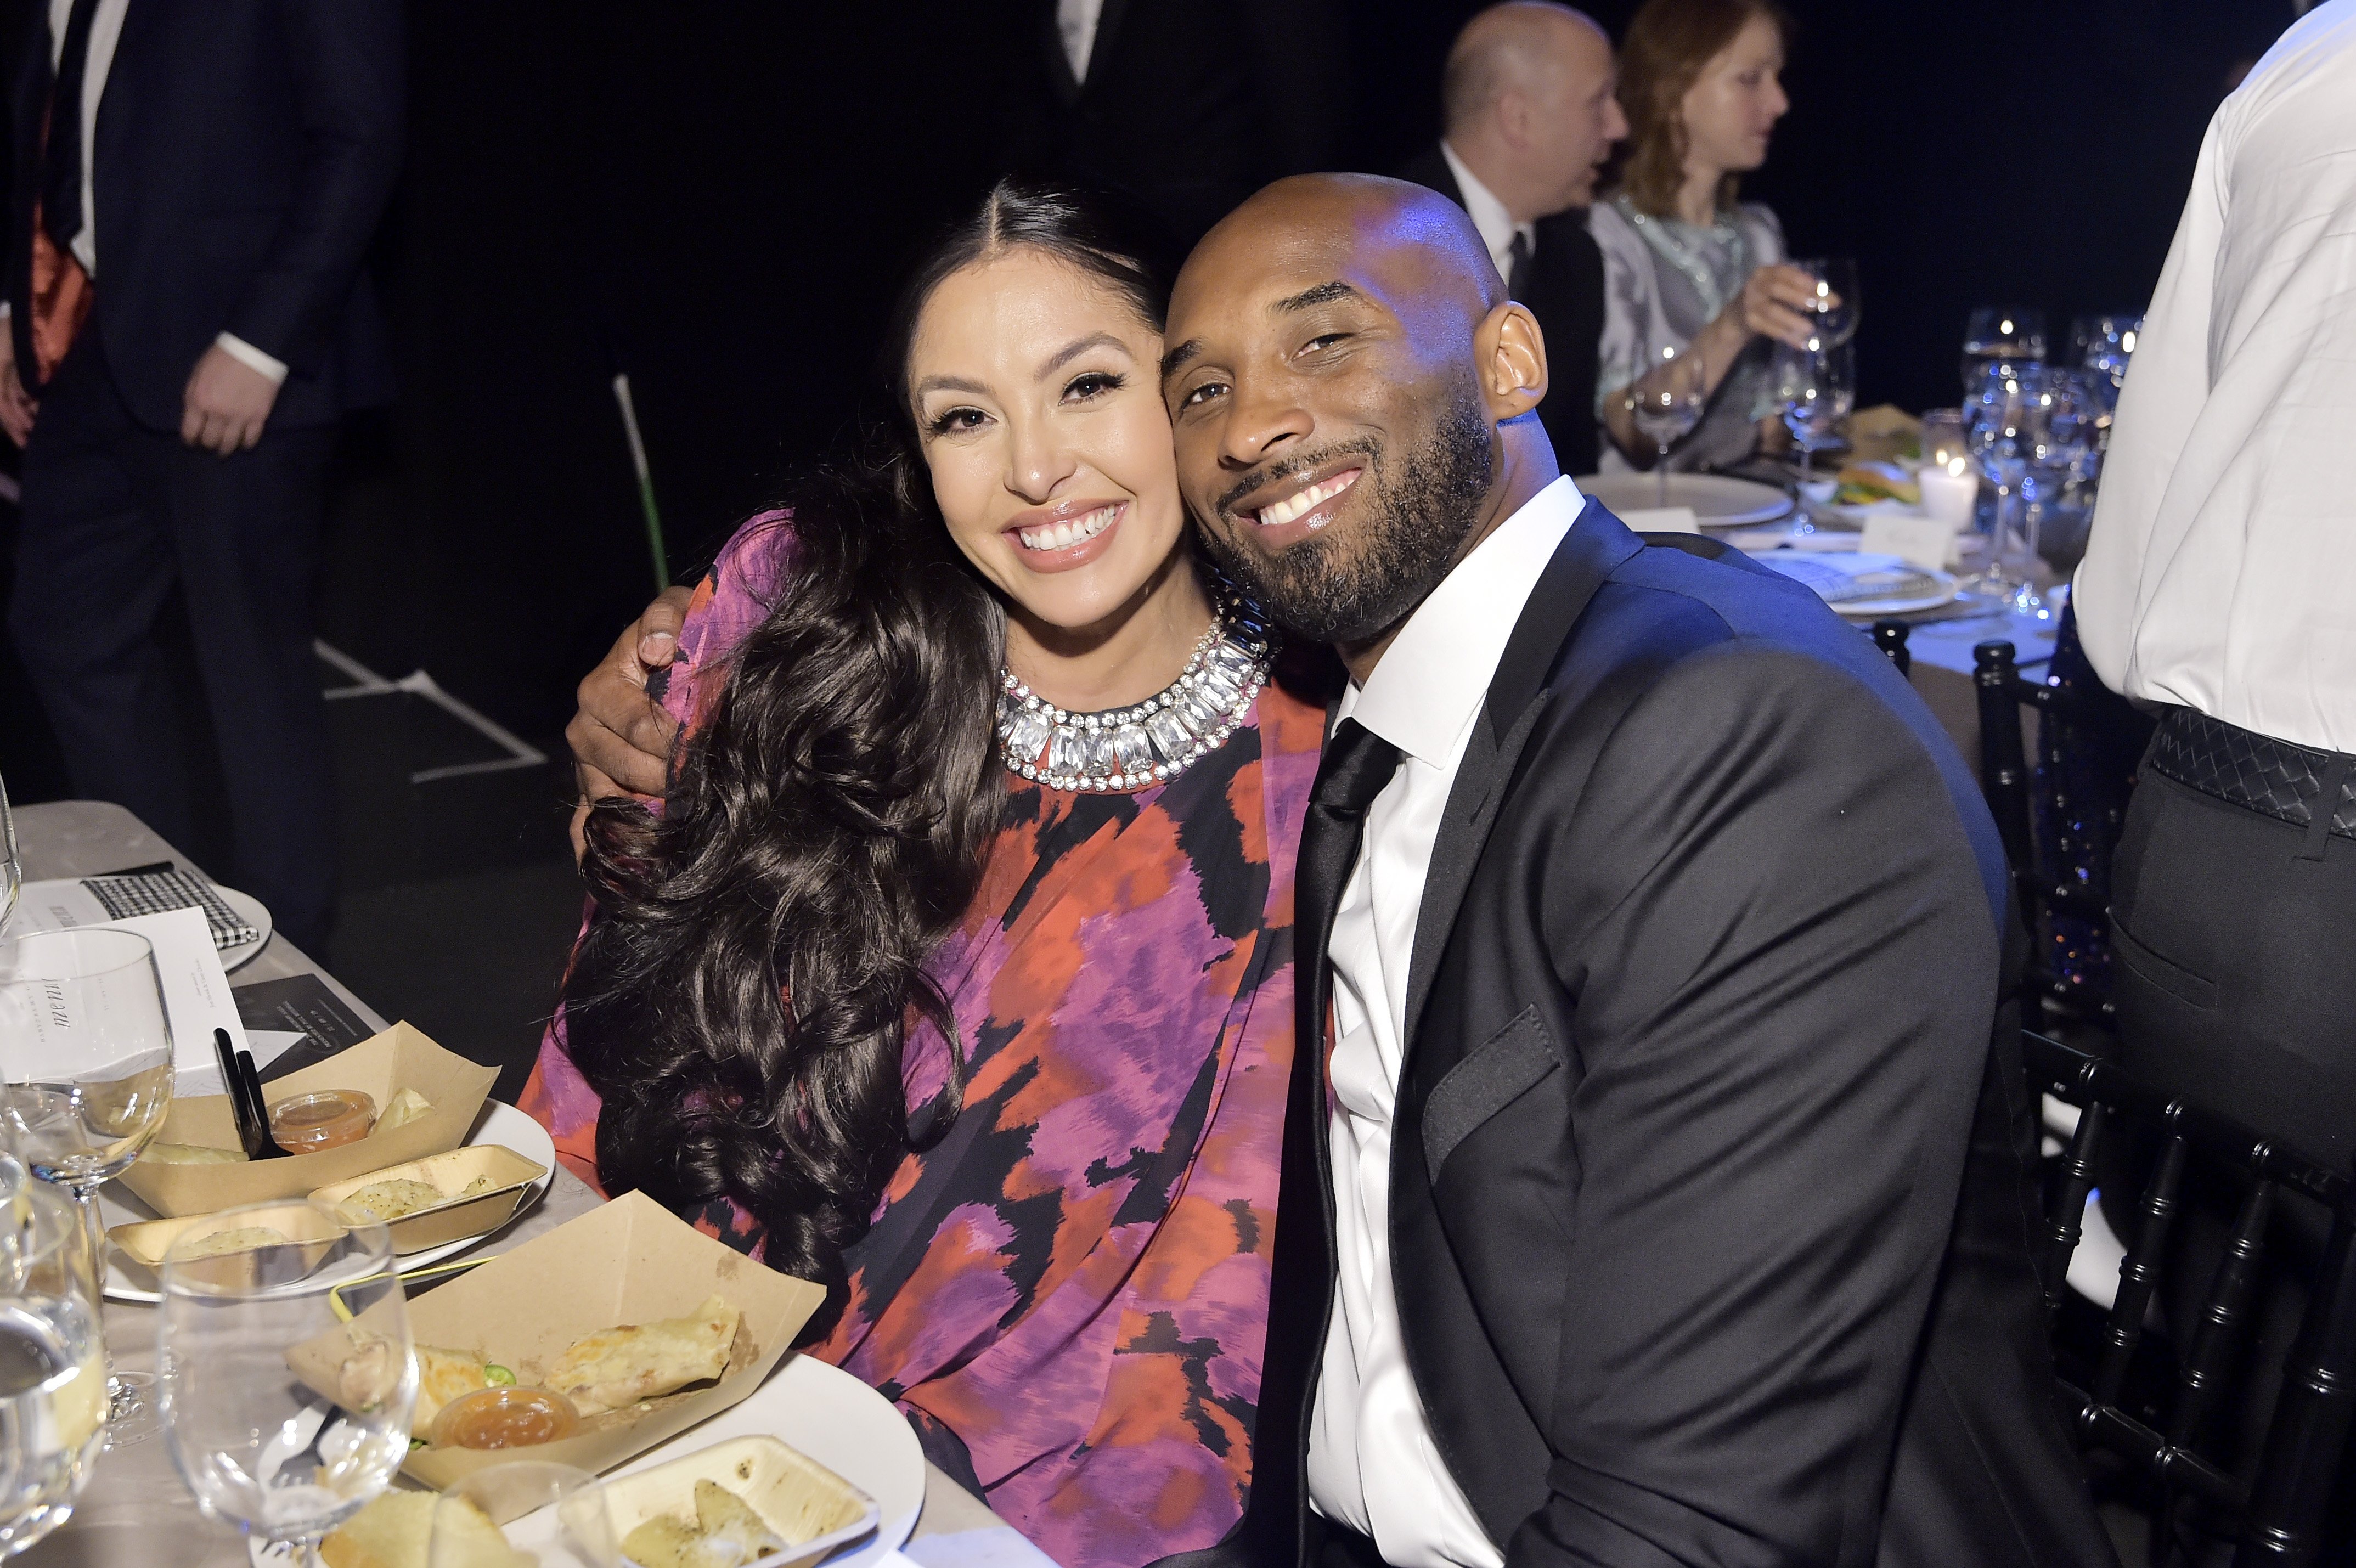 Vanessa Laine Bryant and Kobe Bryant attend the 2019 Baby2Baby Gala presented by Paul Mitchell on November 09, 2019 | Photo: GettyImages